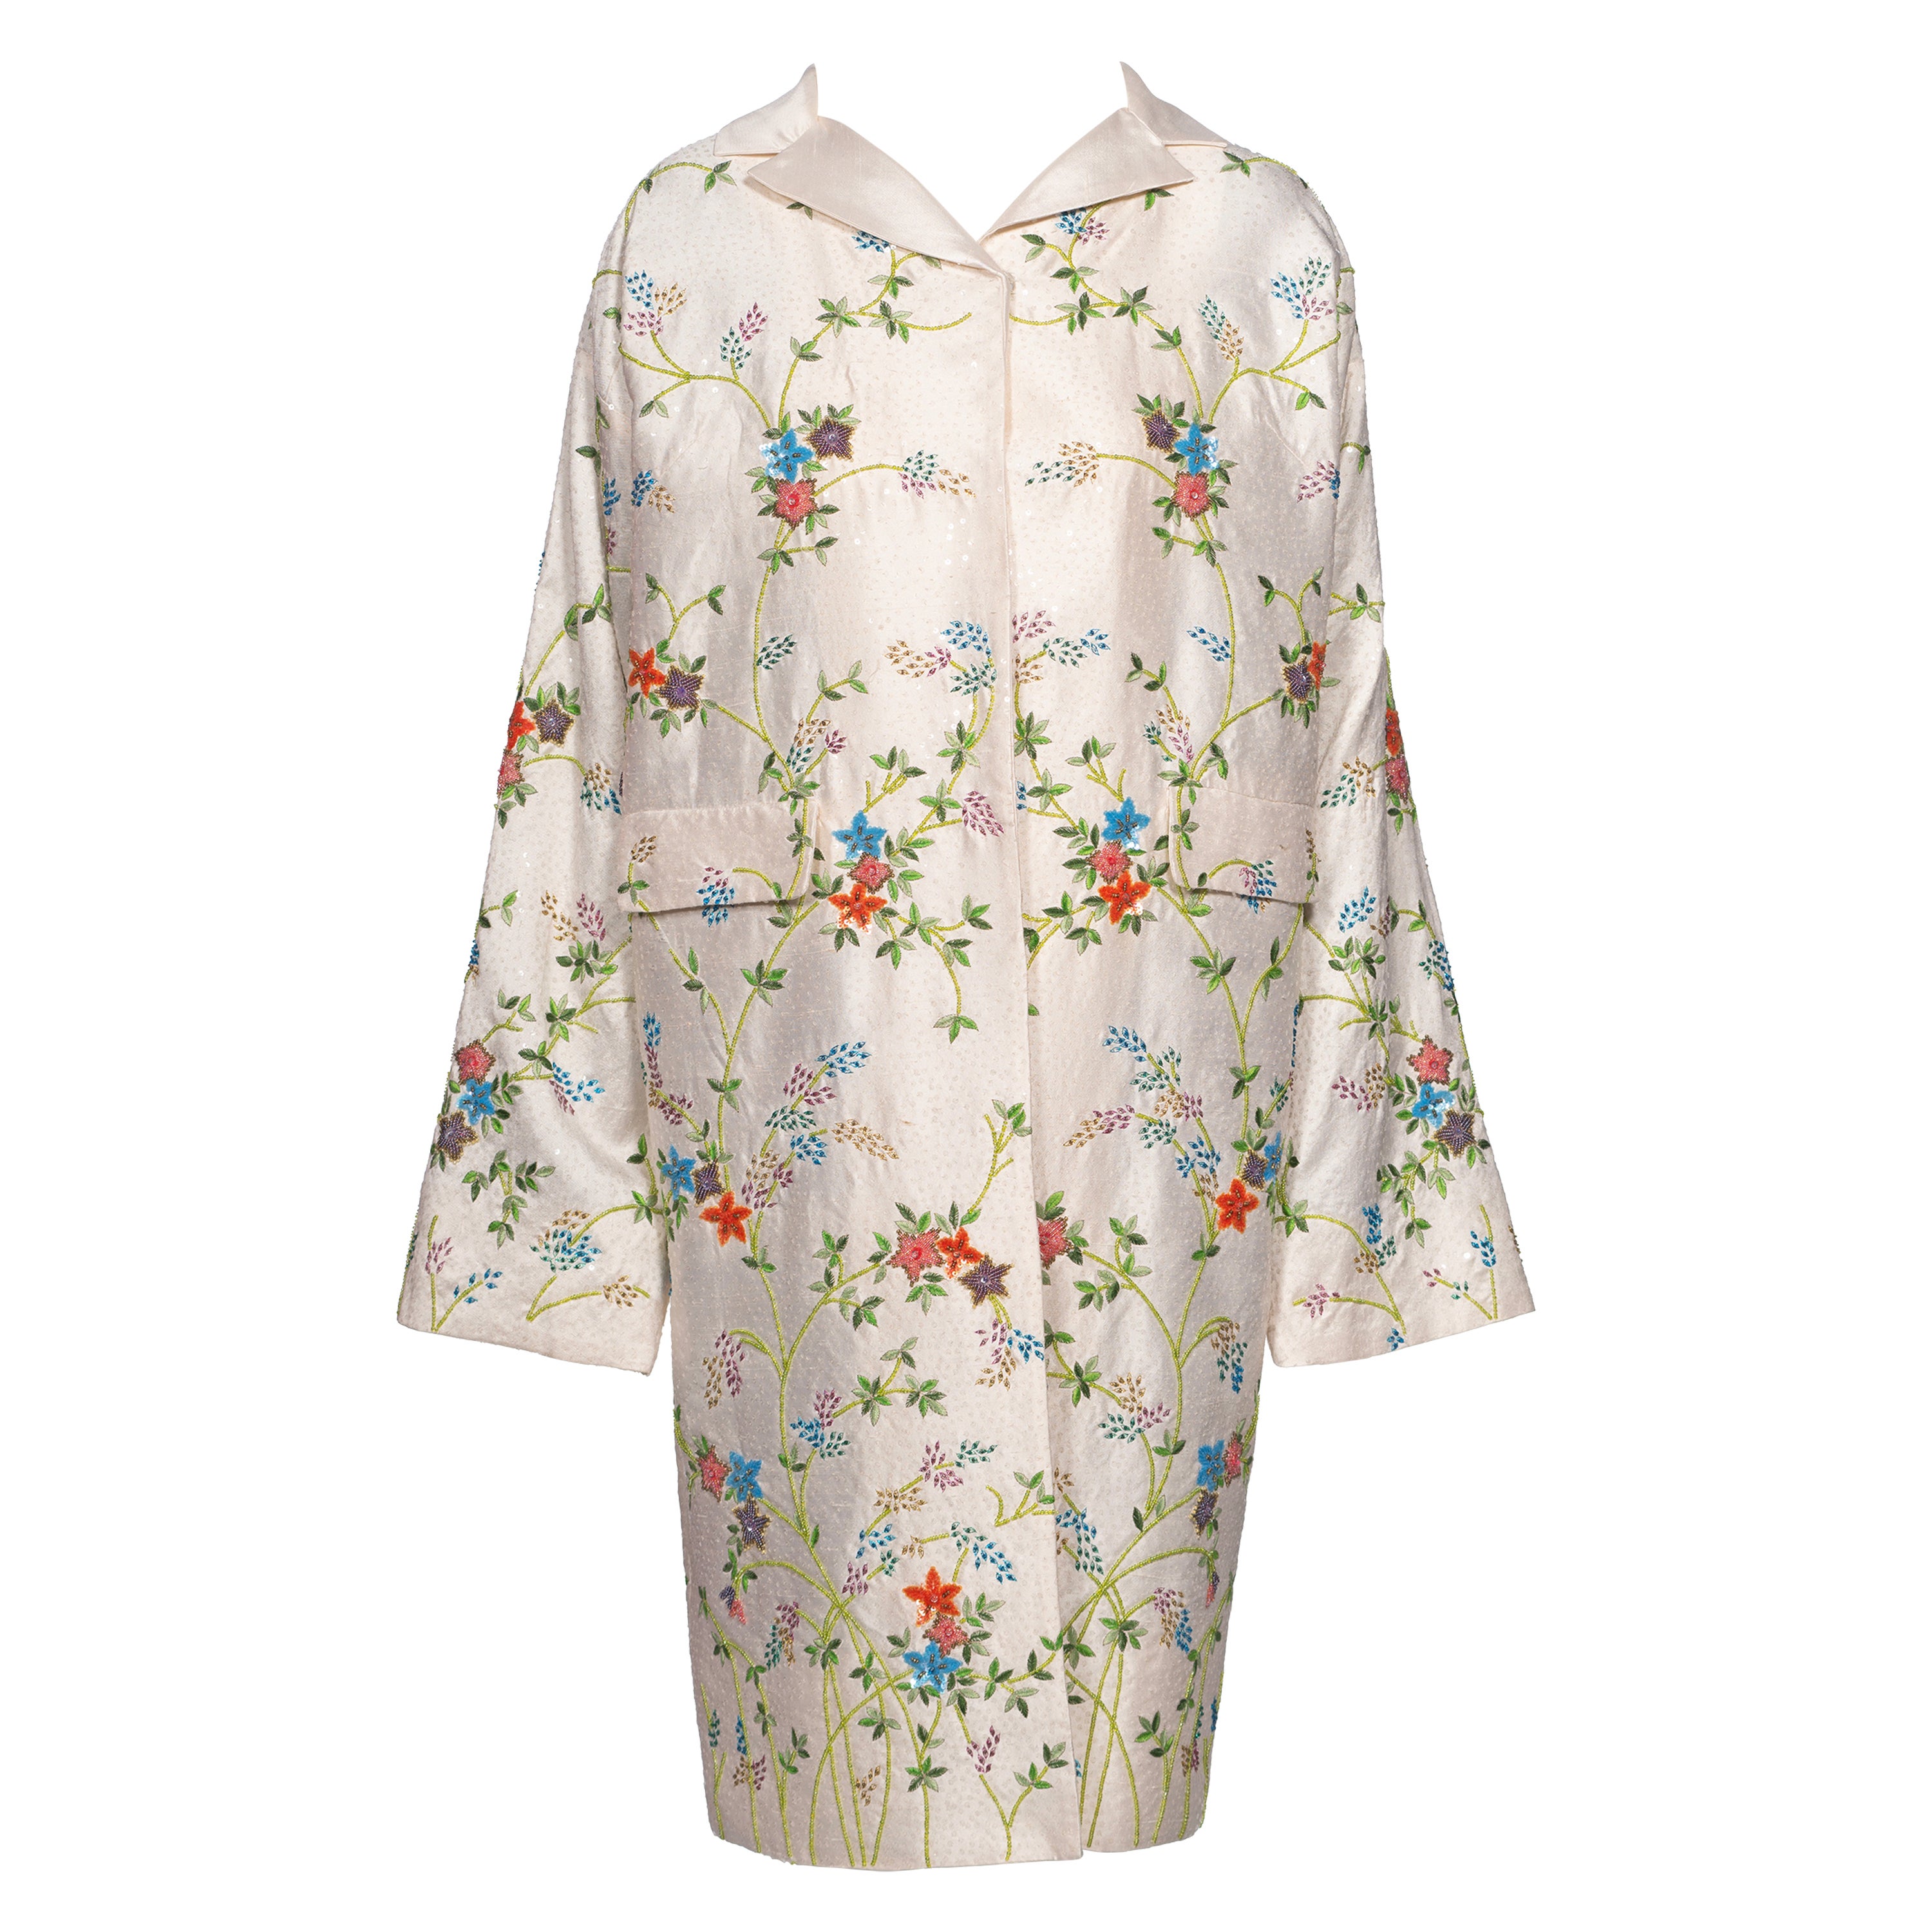 Dolce & Gabbana Hand-Embroidered White Raw Silk Evening Couture Coat, ss 1997 For Sale